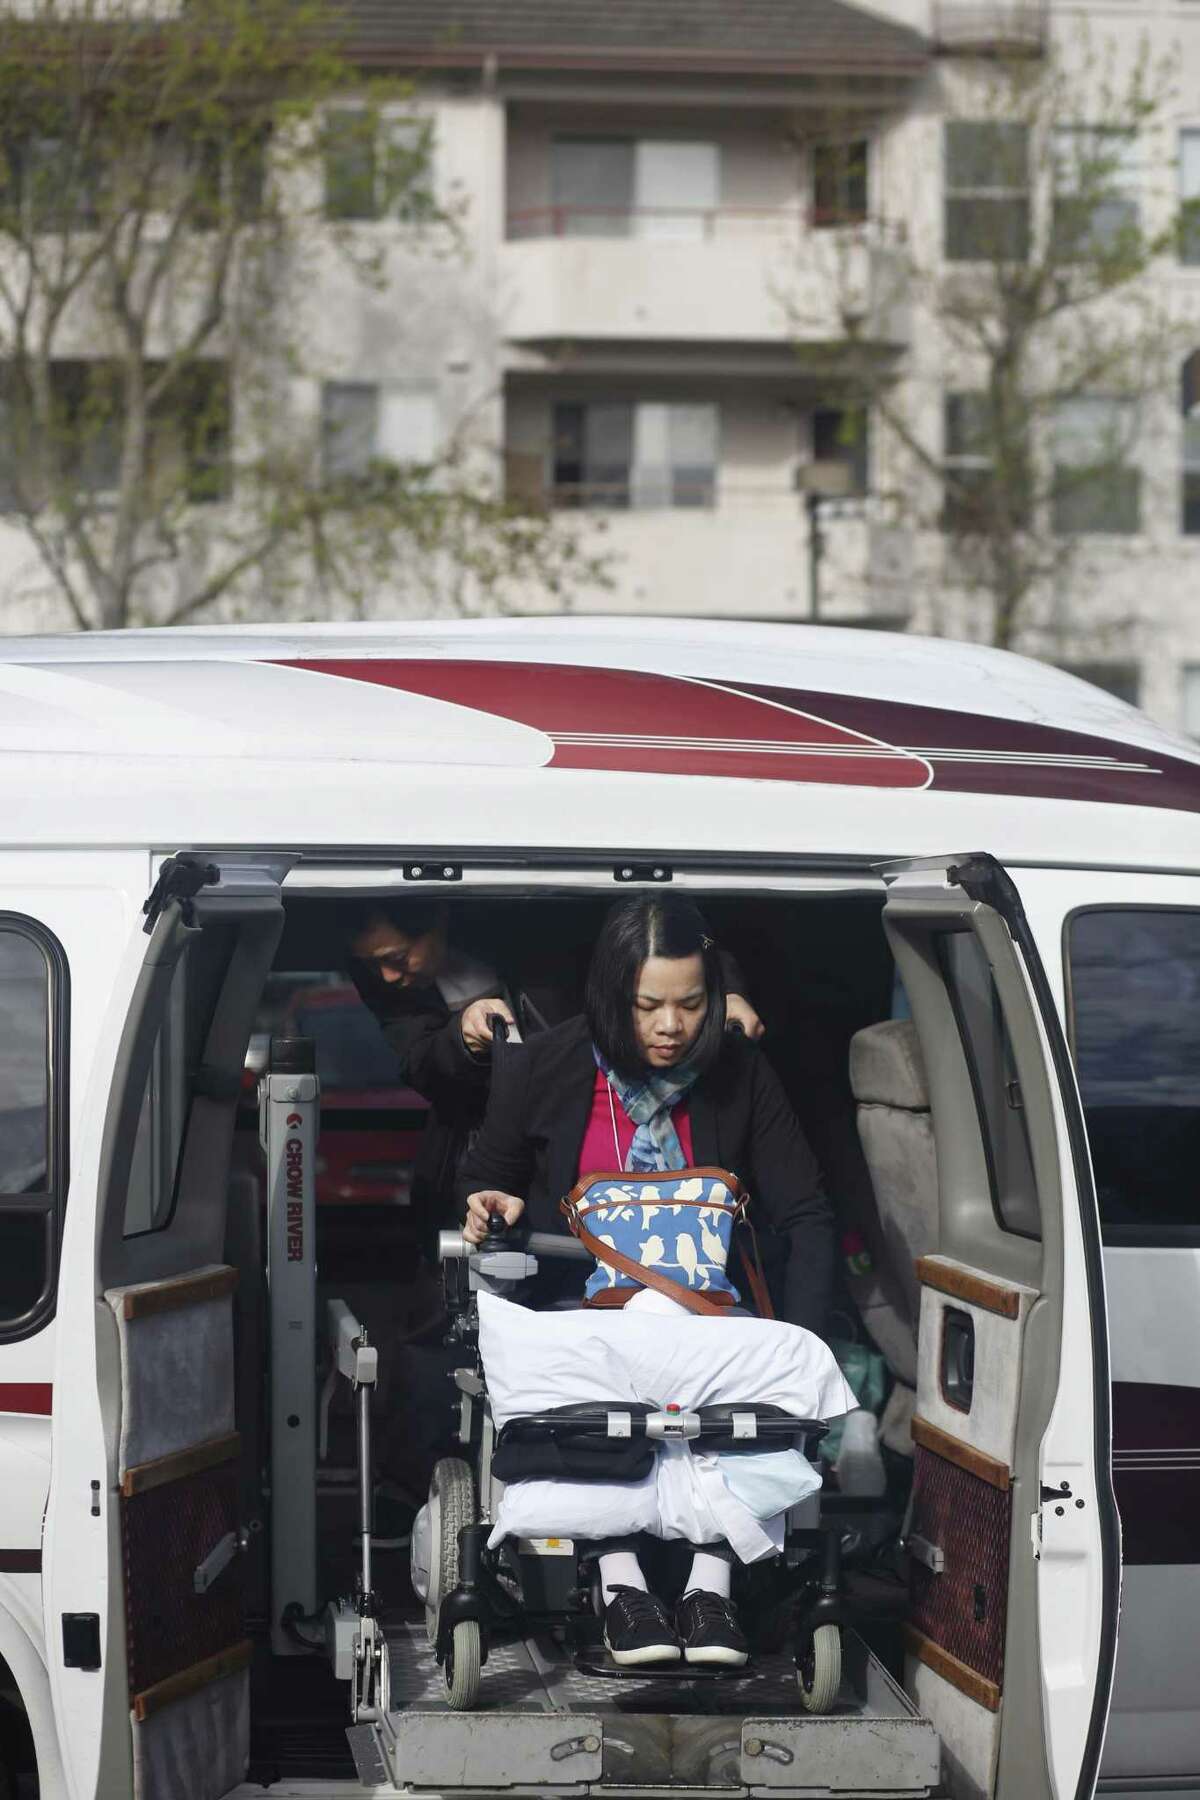 Tony Tan maneuvers wife Emma Zhou’s wheelchair as they disembark from their van to visit the Myoshinji Temple in Orinda with their family in March 2017.